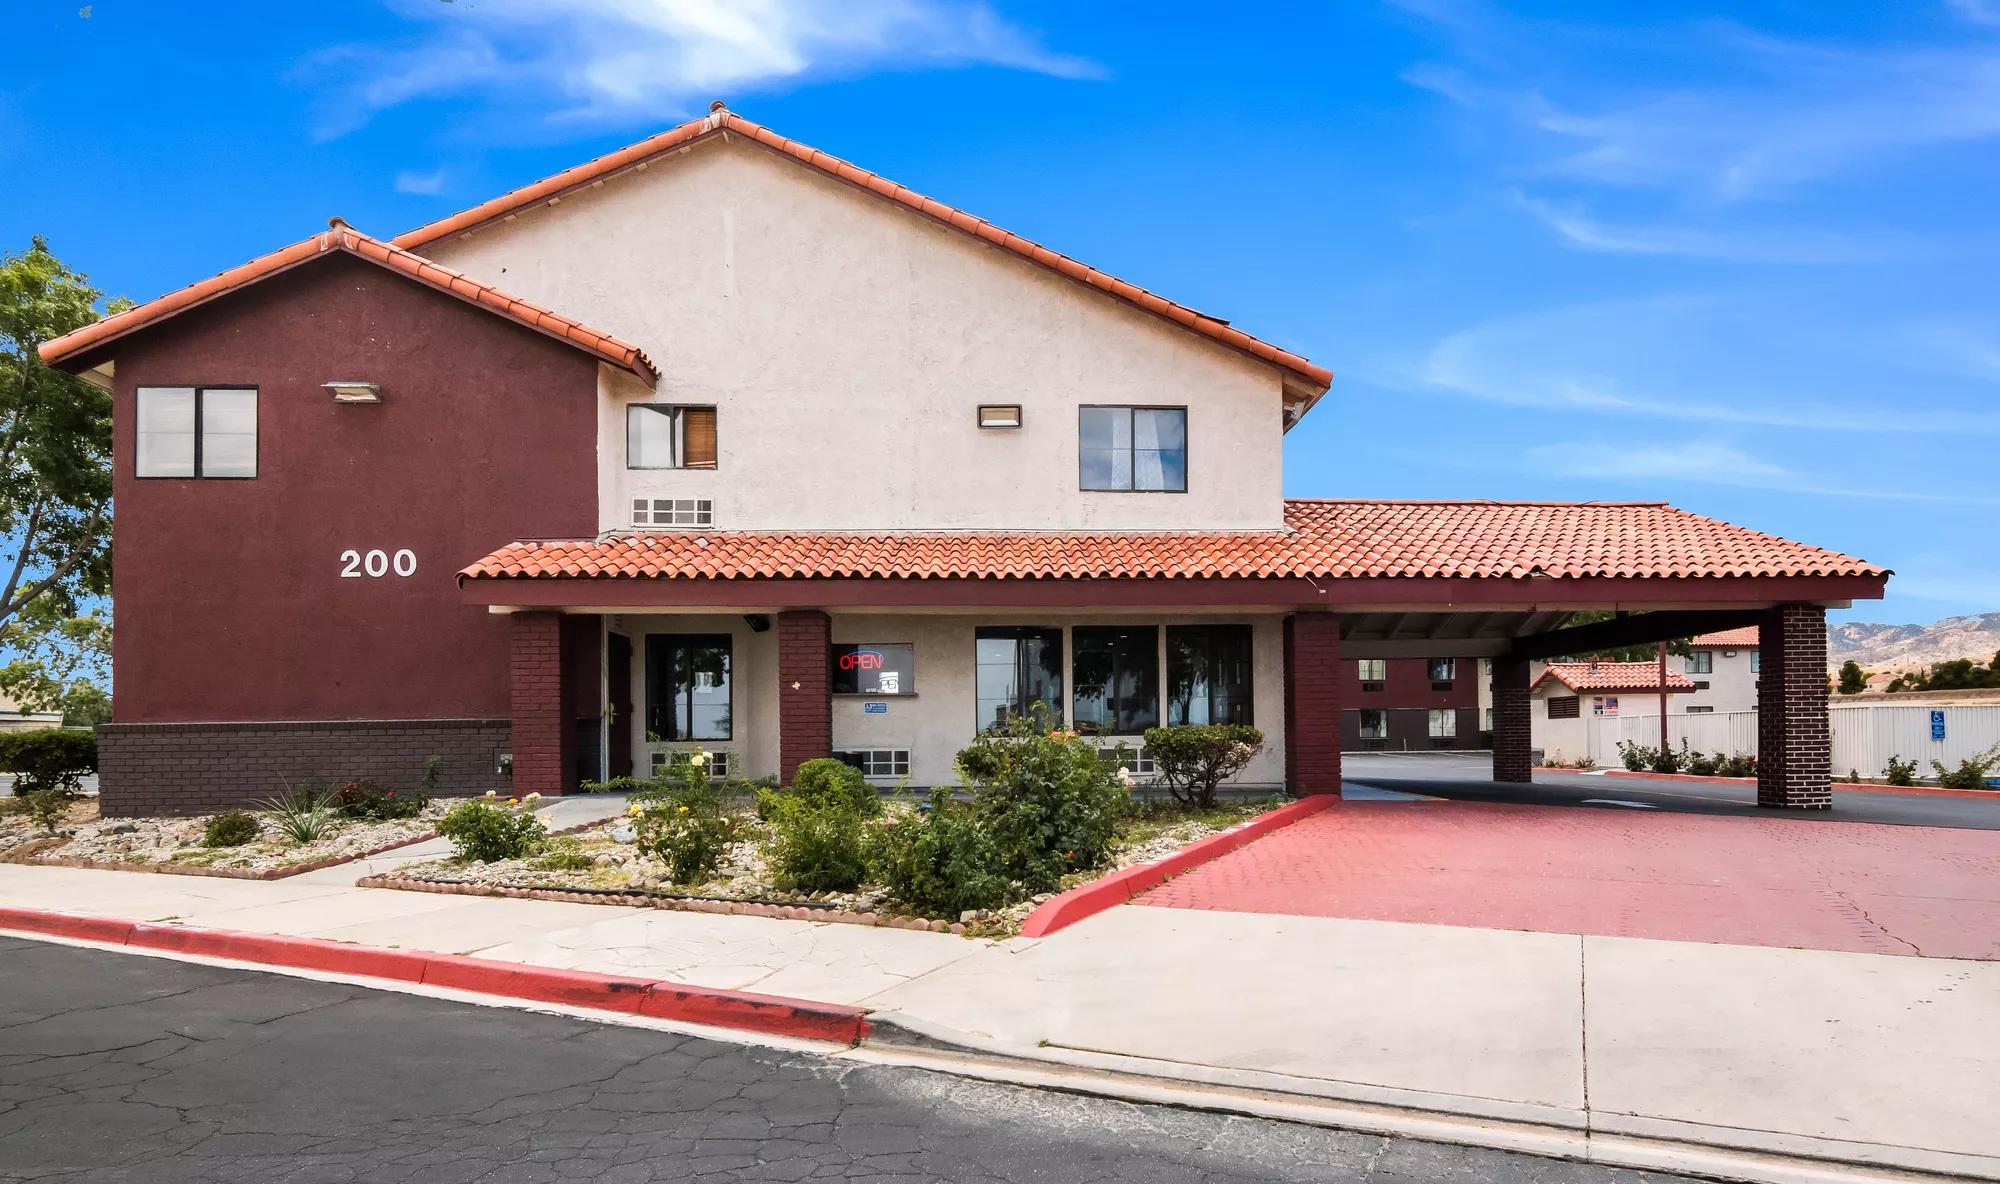 Red Roof Inn Palmdale - Lancaster Exterior Property Image